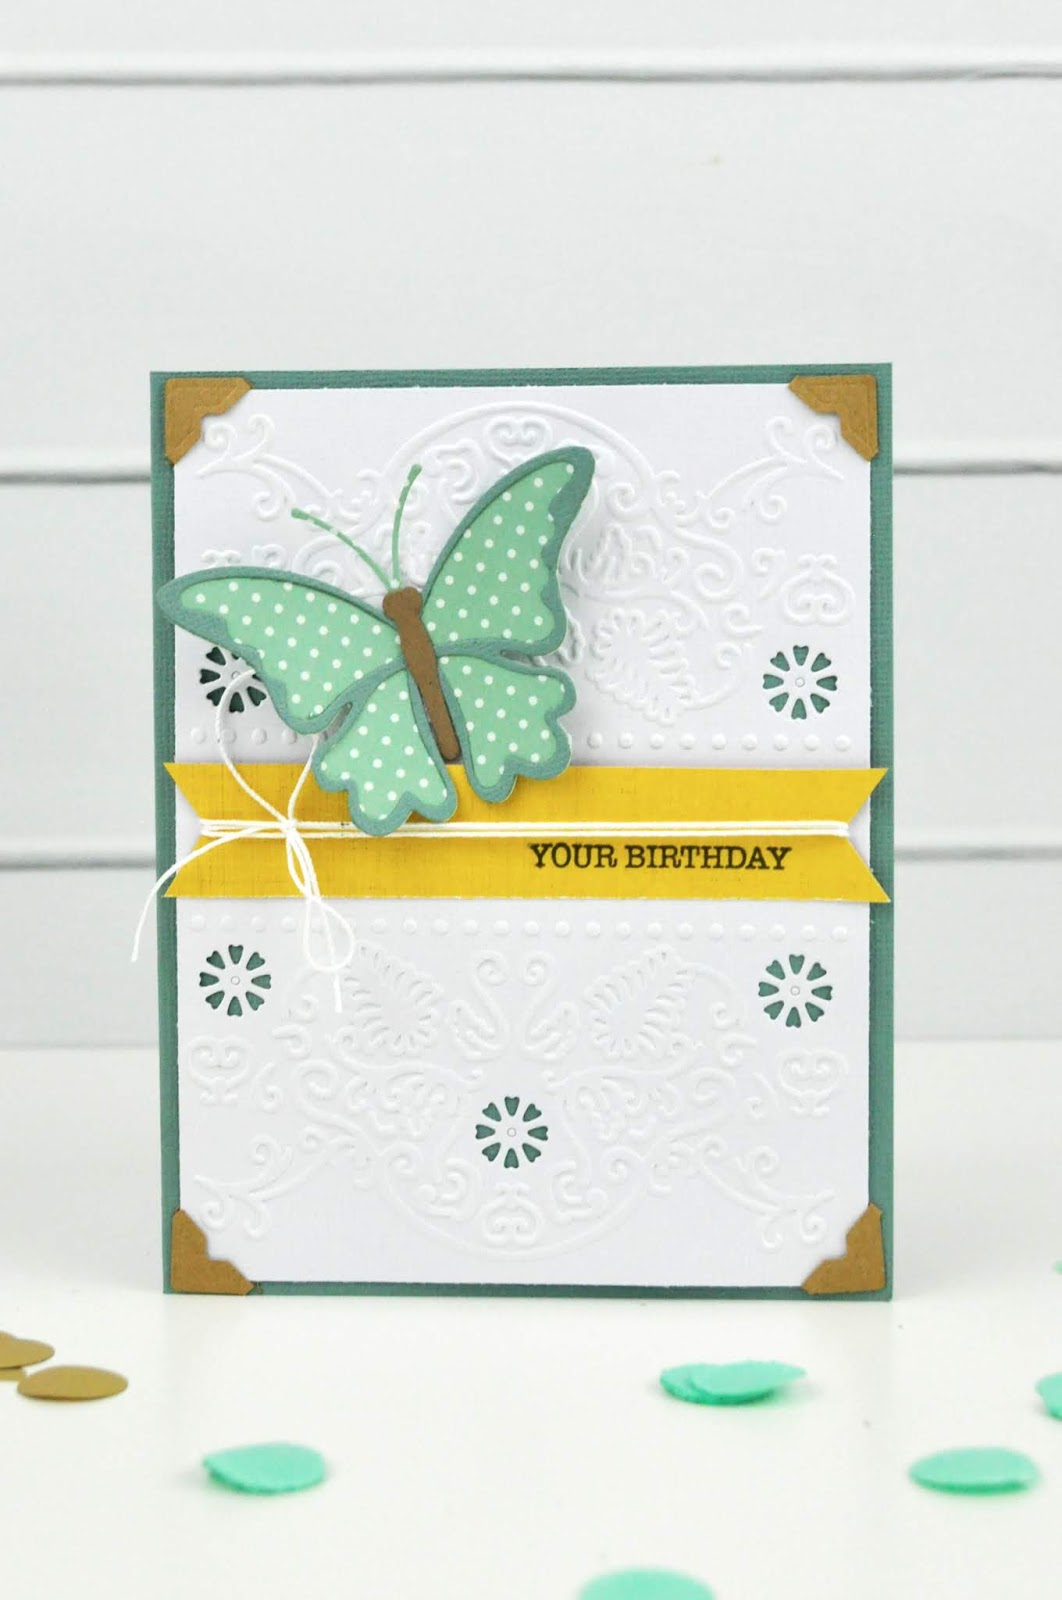 Spellbinders Emboss and Die Cut Folders tutorial by Jen Gallacher featuring the Spellbinders Platinum machine and dies and stamps from Spellbinders. #embossingfolder #diecutting #spellbinders #jengallacher